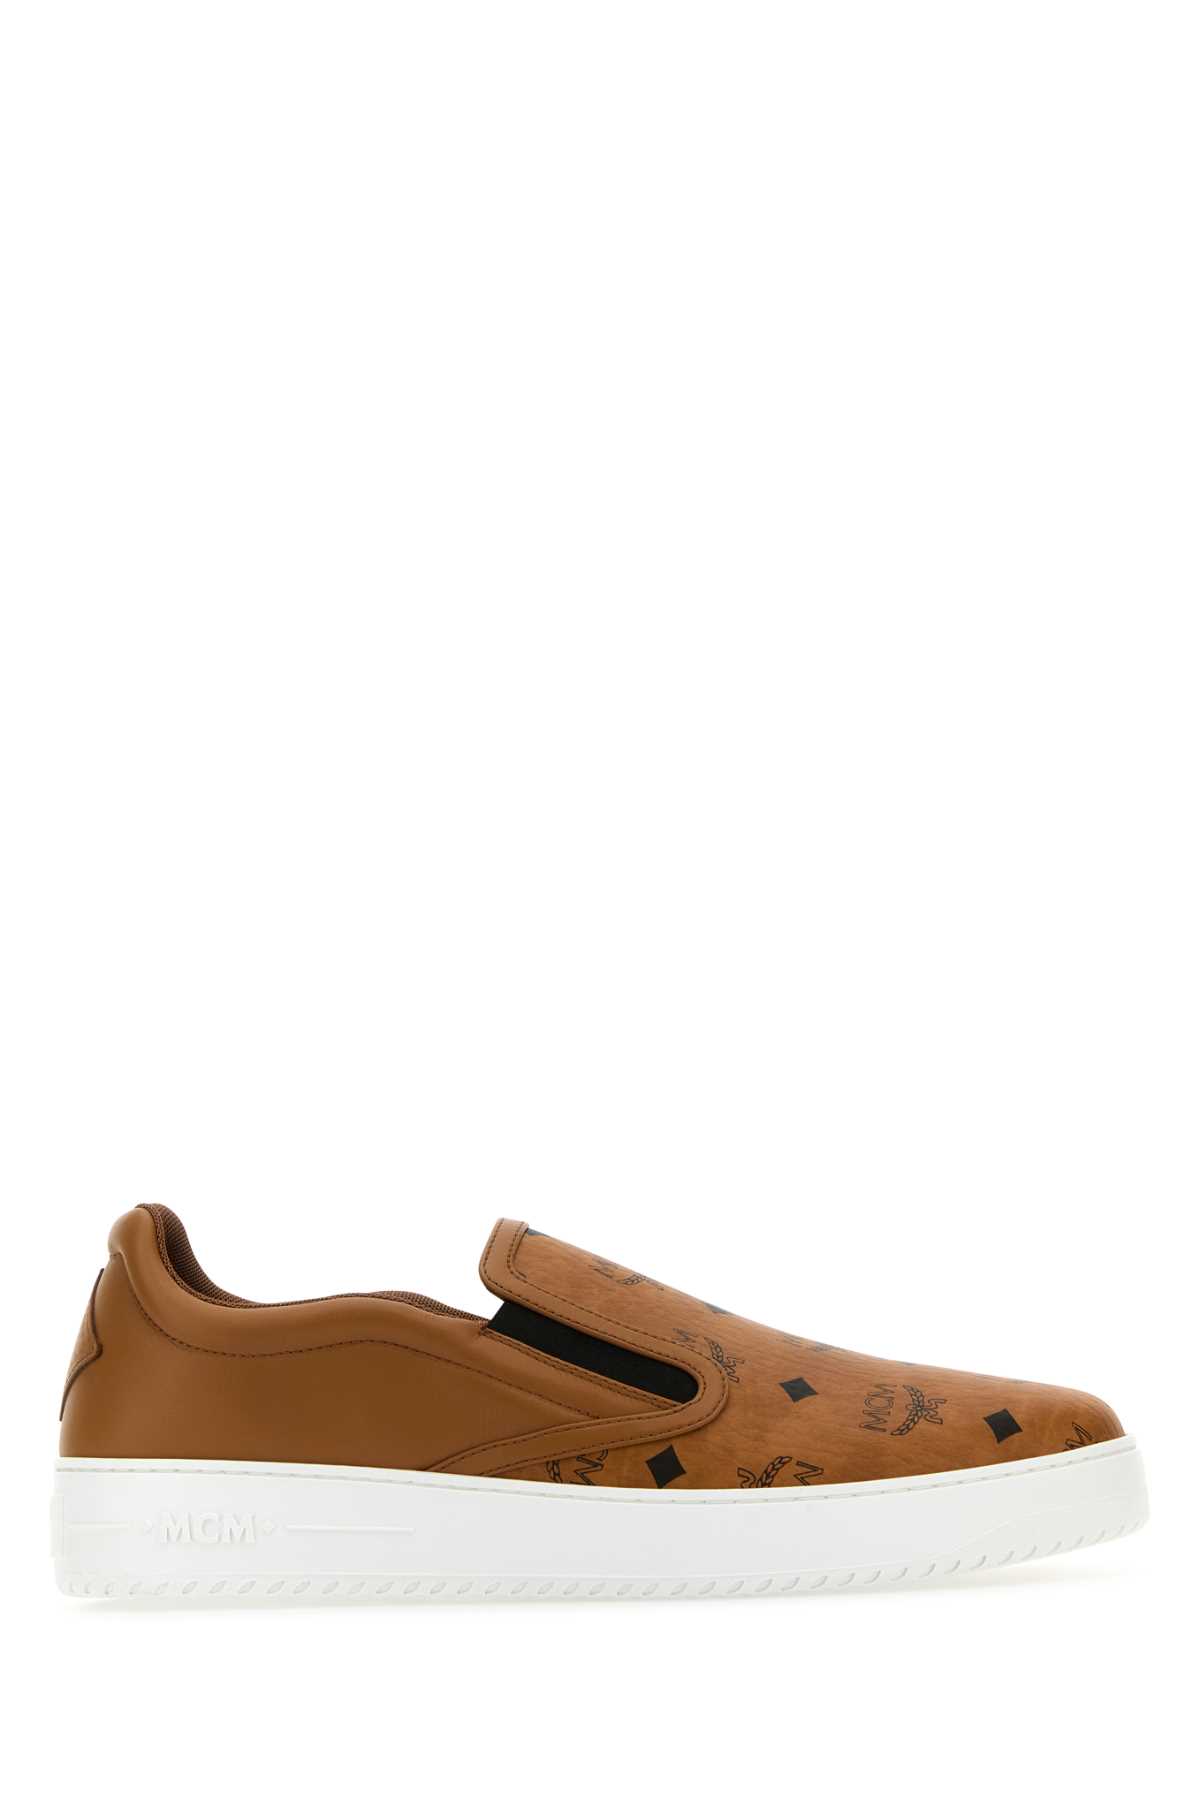 Shop Mcm Caramel Canvas And Leather Terrain Slip Ons In Cognac